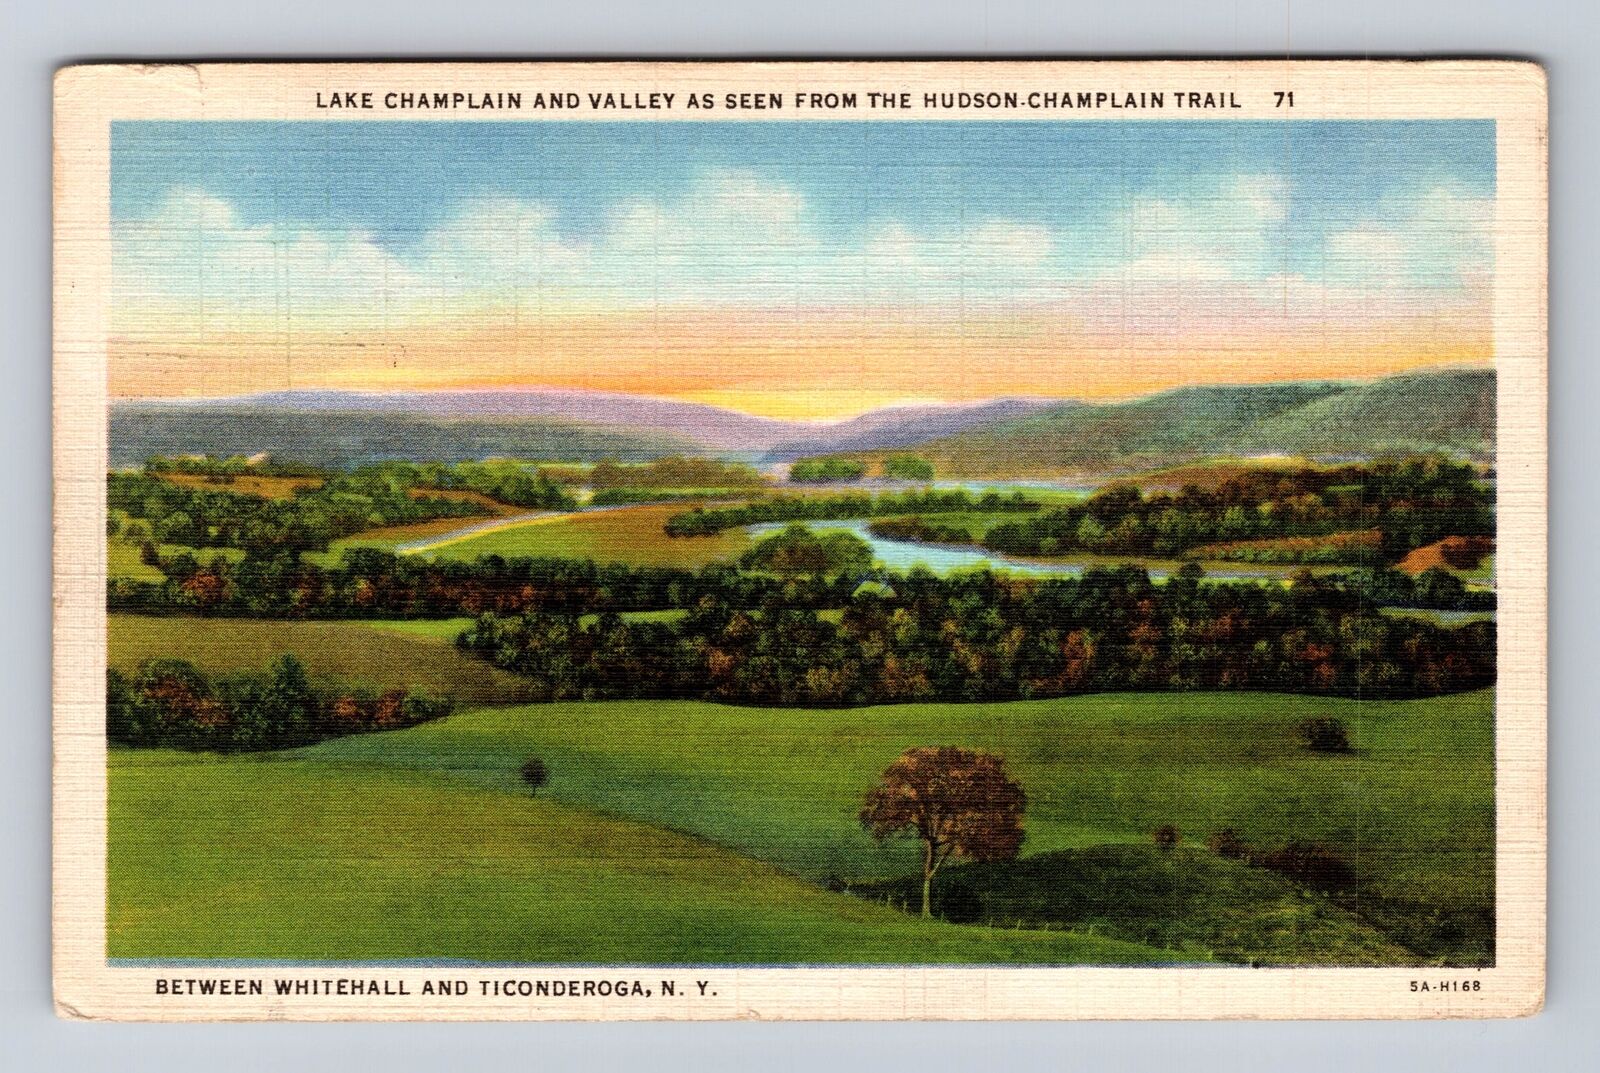 Whitehall NY-New York, Lake Champlain & Valley From Trail, Vintage Postcard